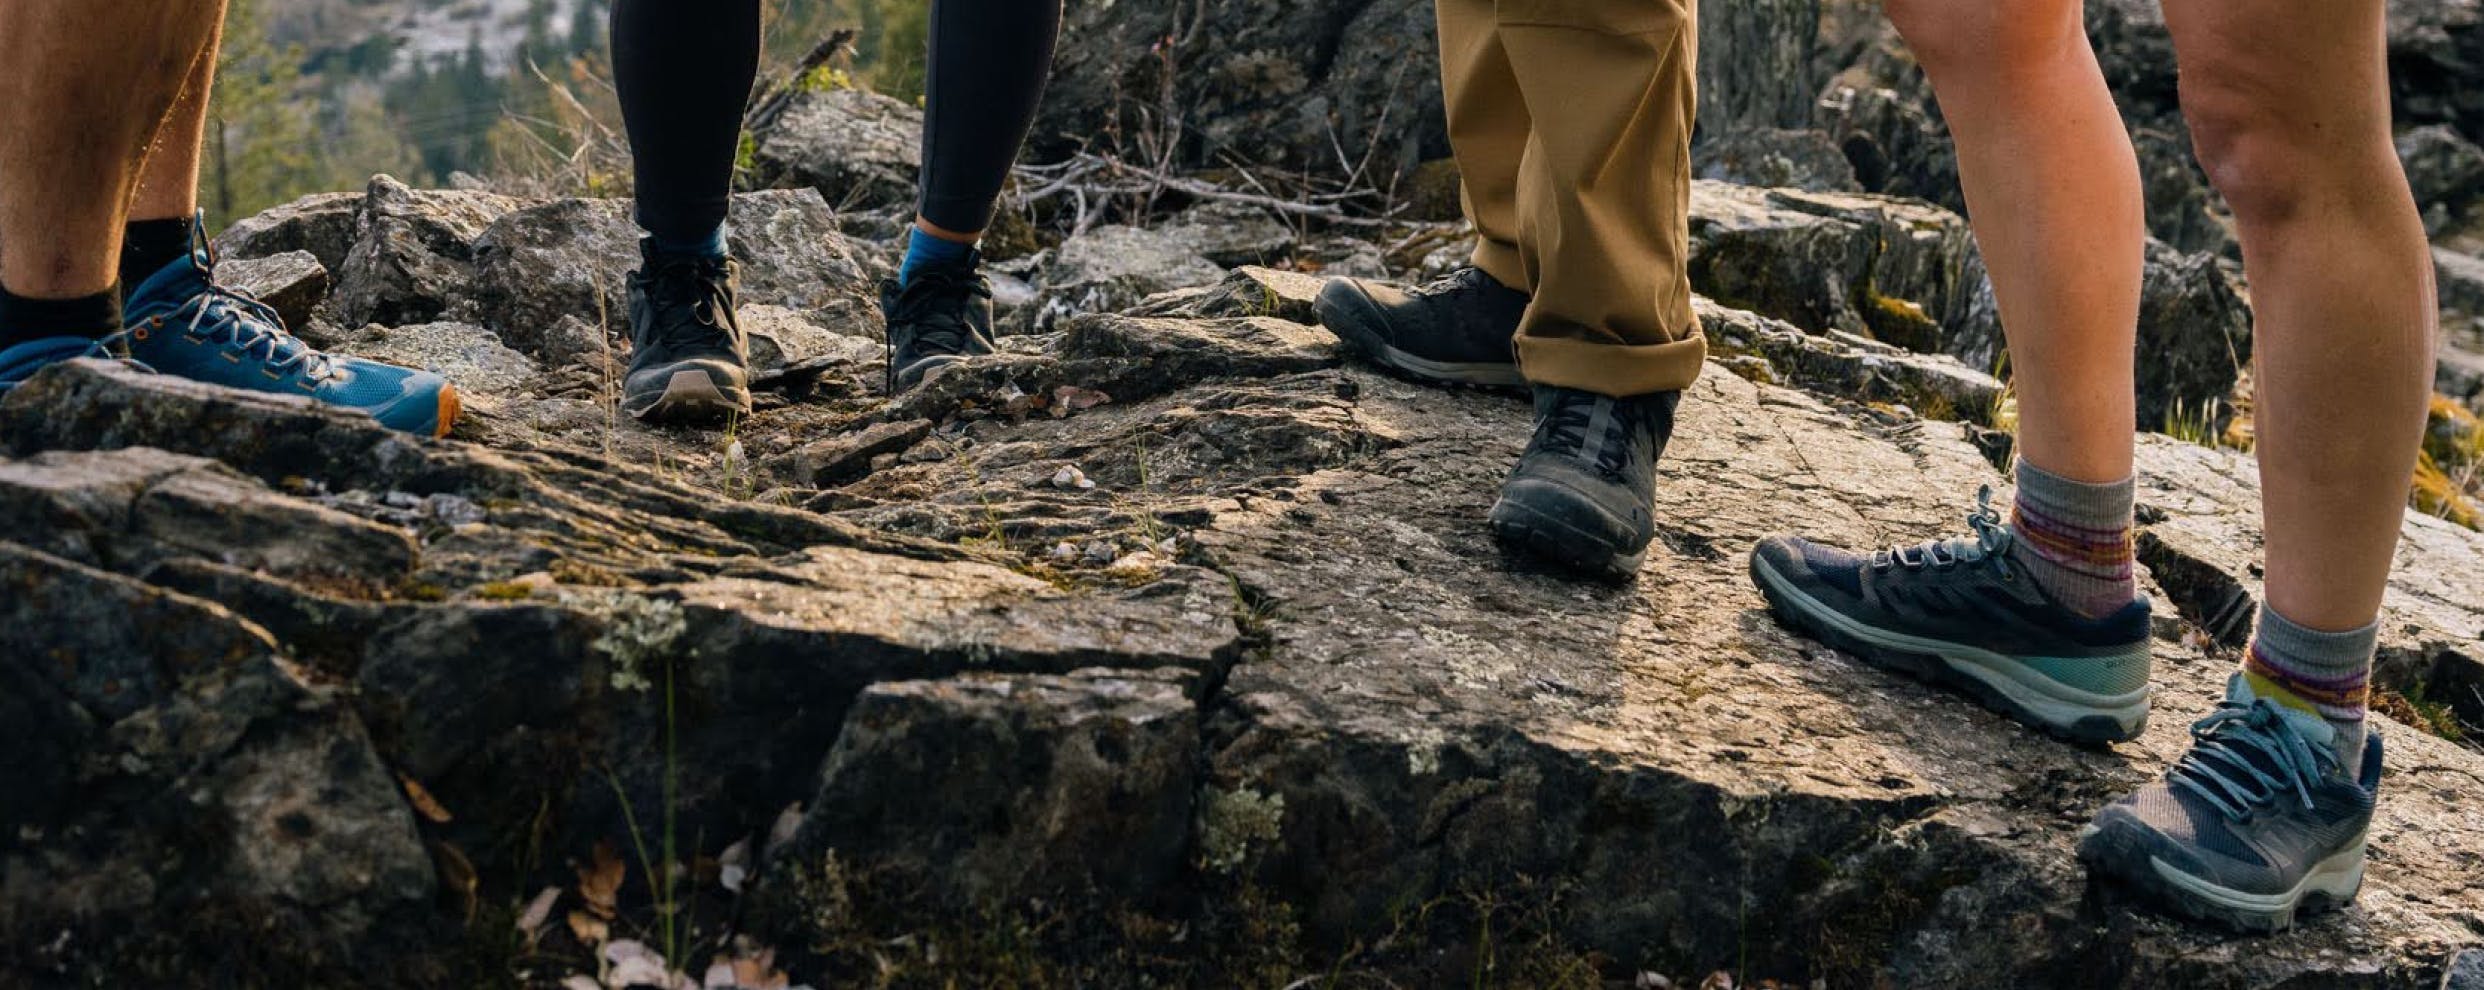 Lace up with long-lasting hiking shoes to head out and explore the trails.